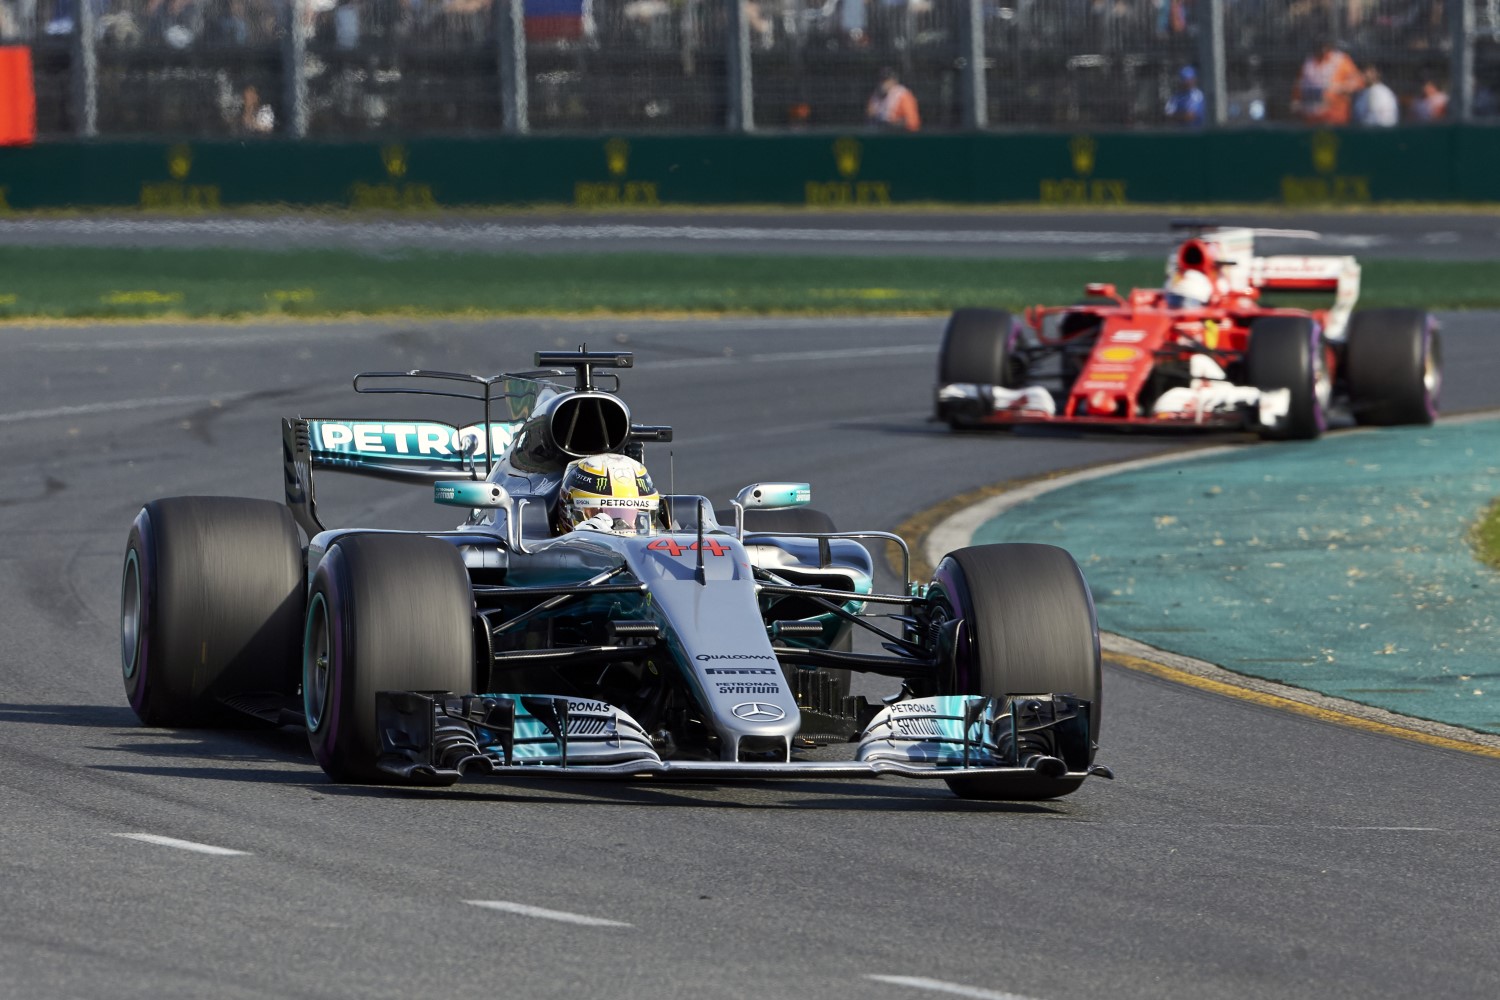 The Mercedes vs. Battle is on in F1. Now it comes down to who can develop the car better as the year progresses